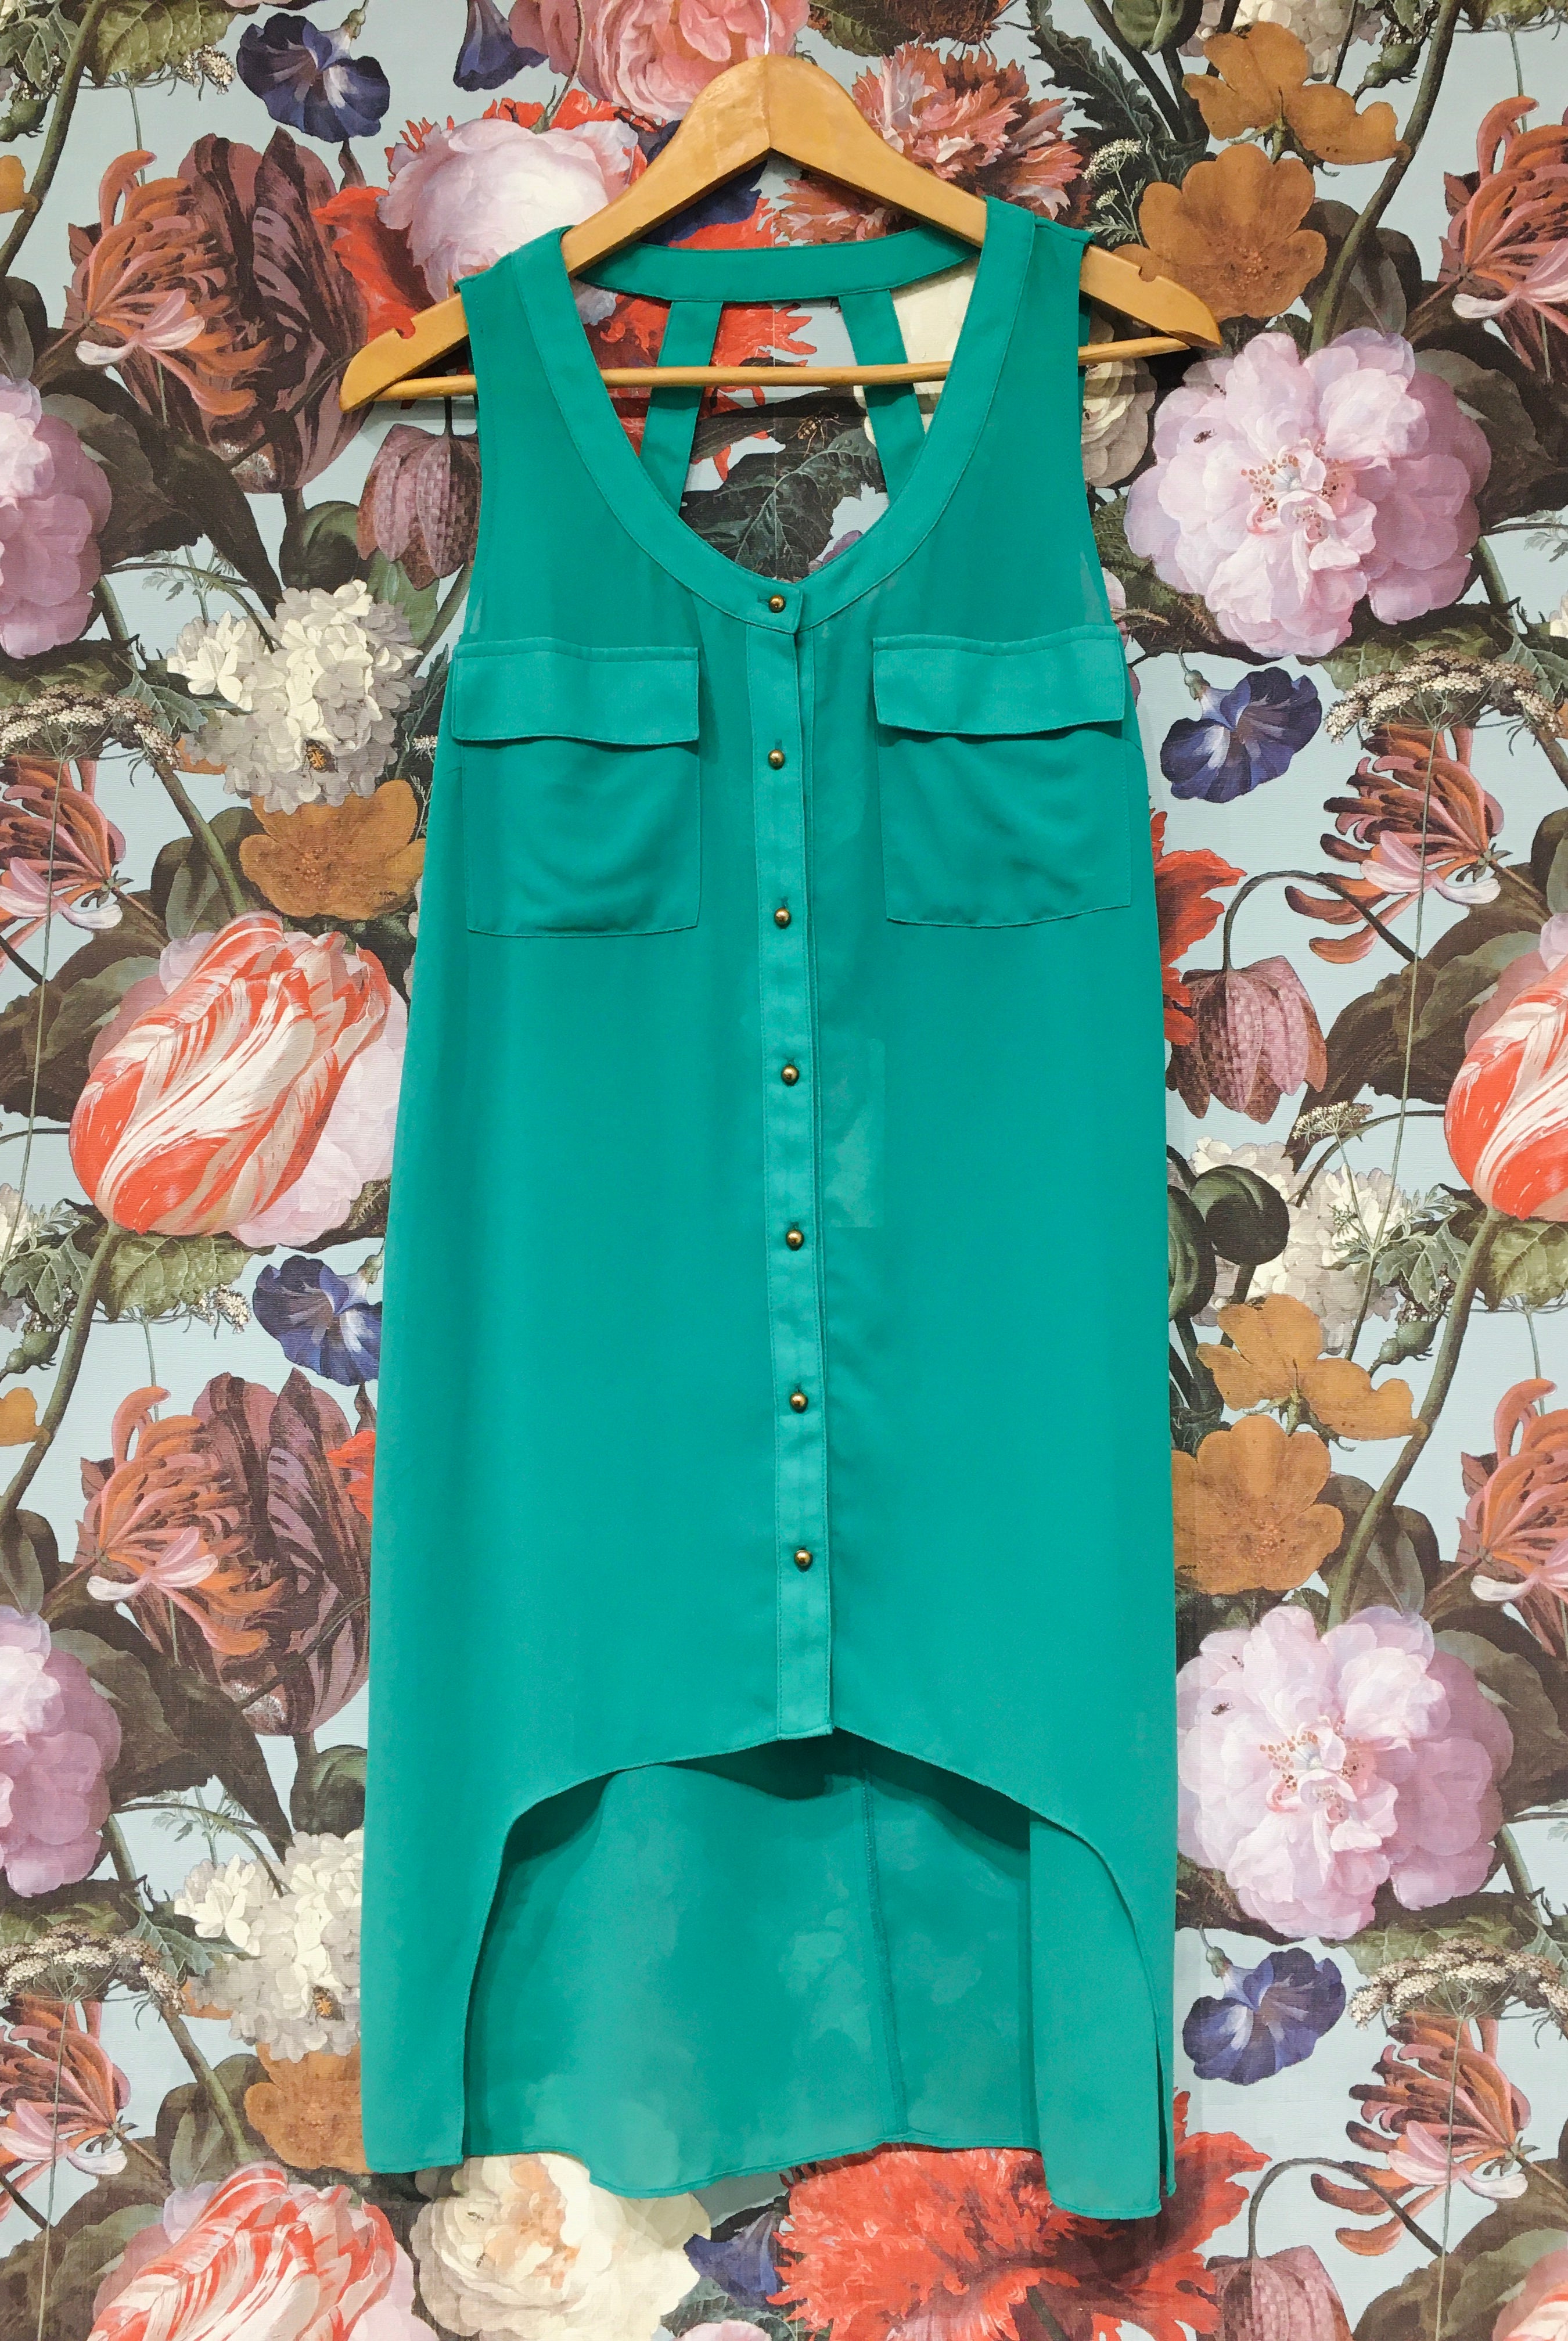 PINK MARTINI // MARCELLE DRESS GREEN